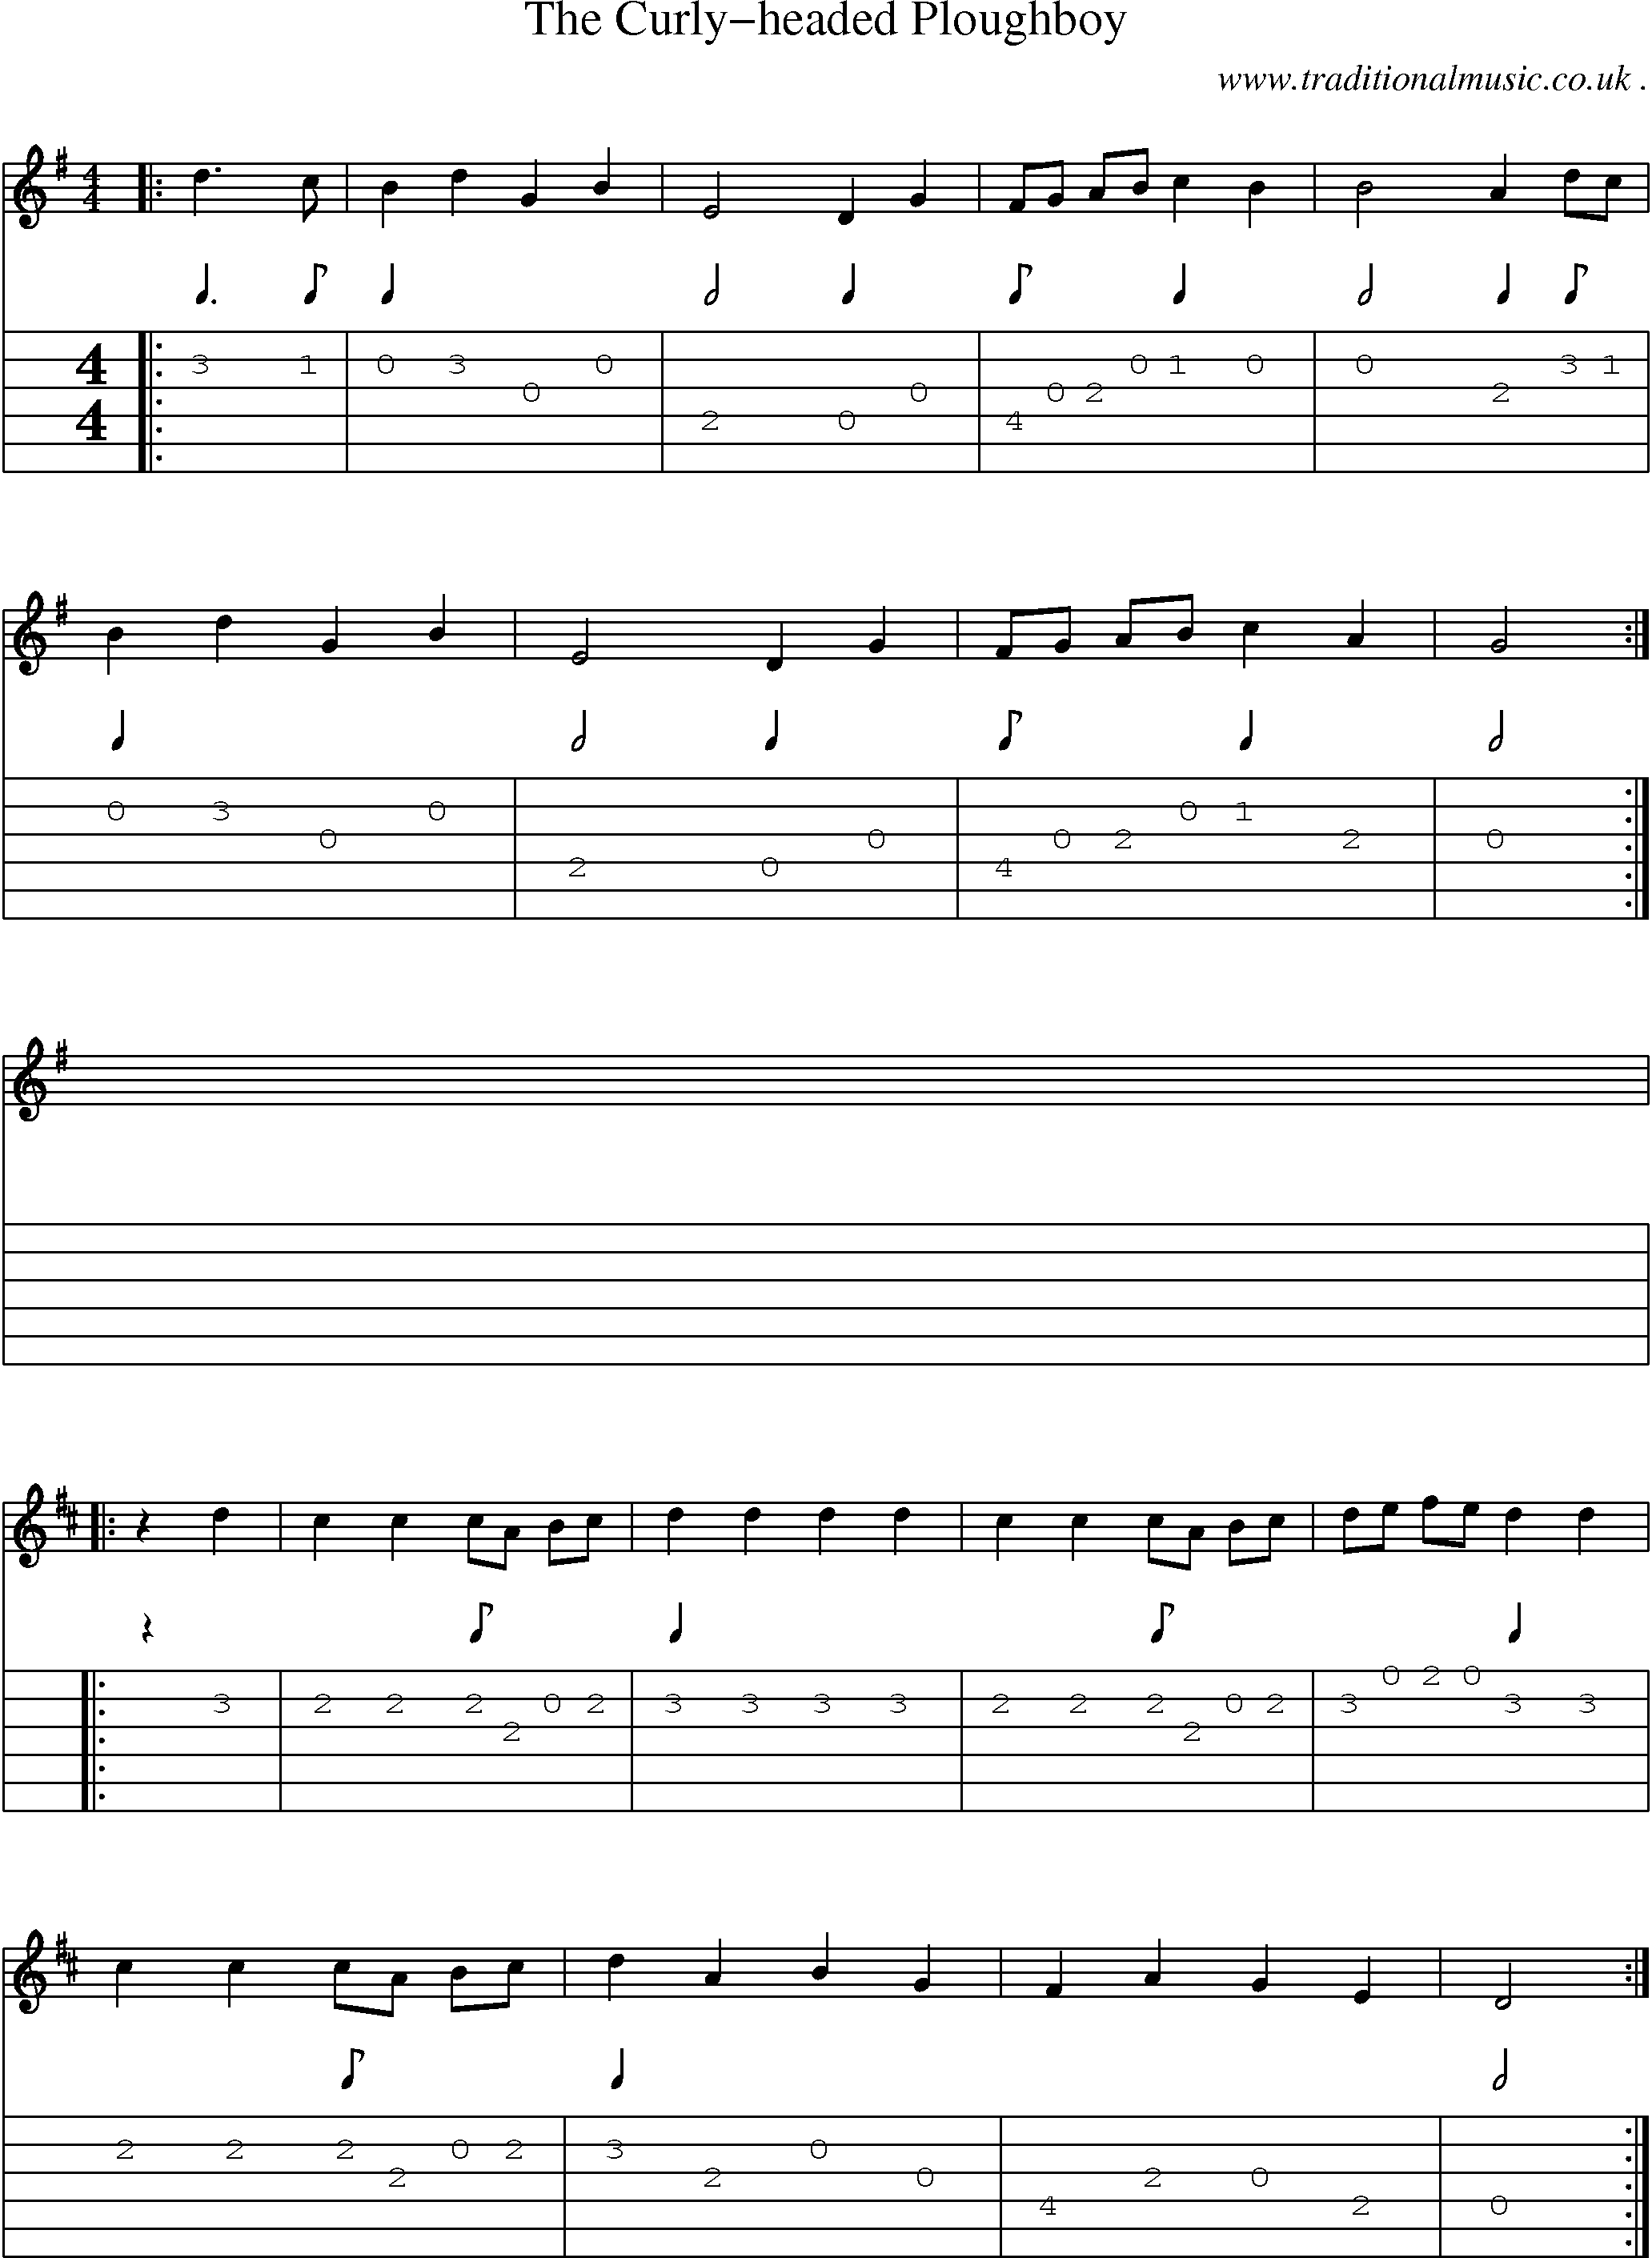 Sheet-Music and Guitar Tabs for The Curly-headed Ploughboy